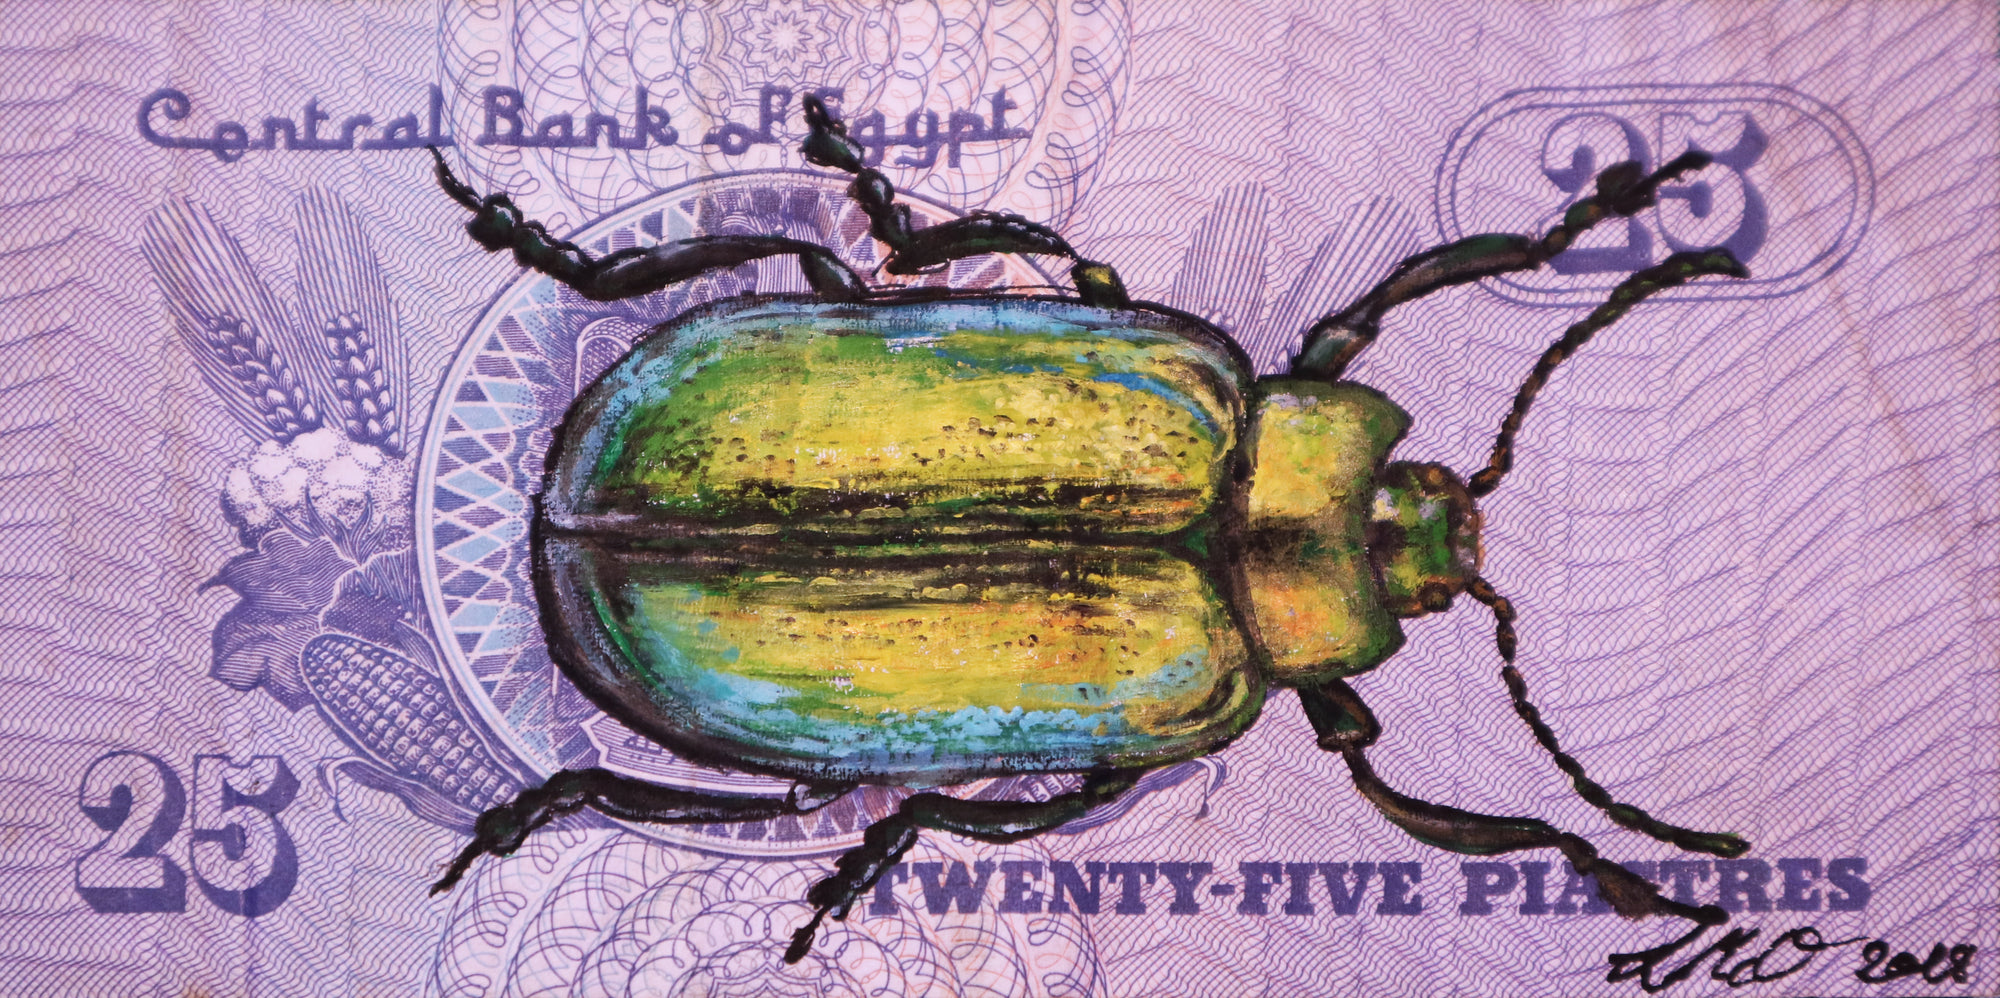 Louise McNaught - Iridescent Scarab Beetle on Egyptian Piastres